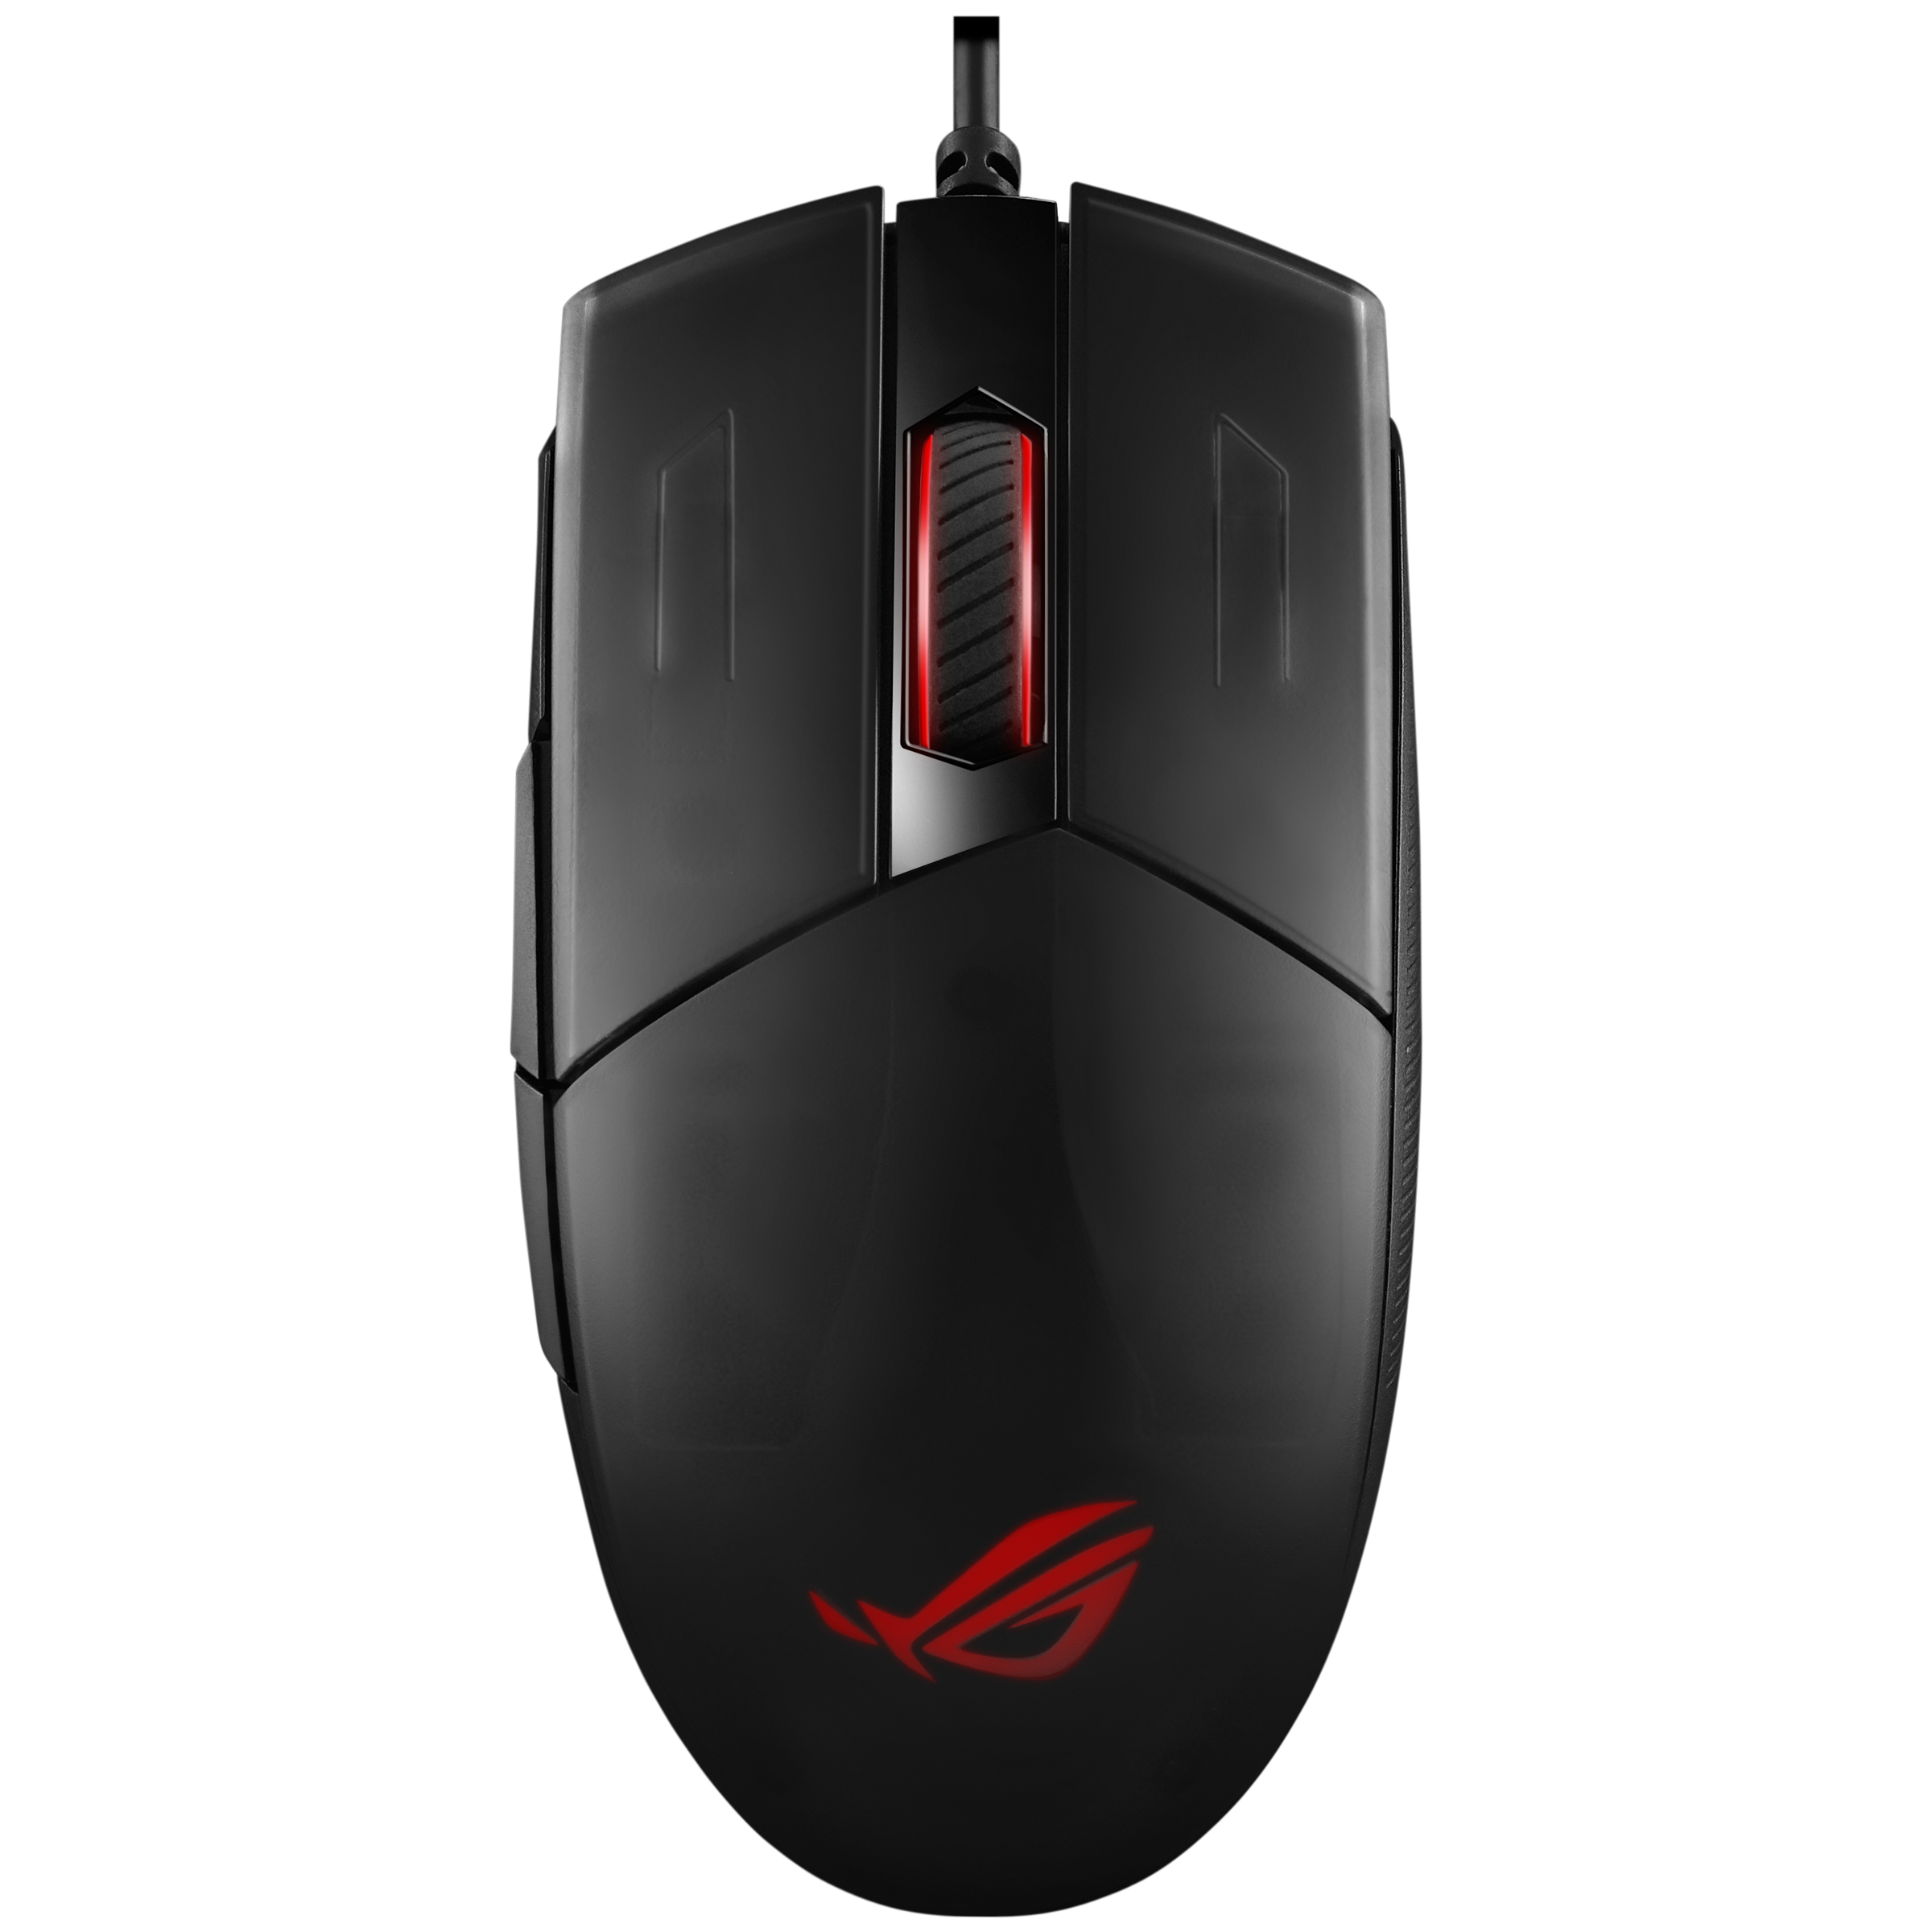 ASUS ROG Strix Impact II Wired Optical Gaming Mouse (6200 DPI, Ambidextrous Design, Black)